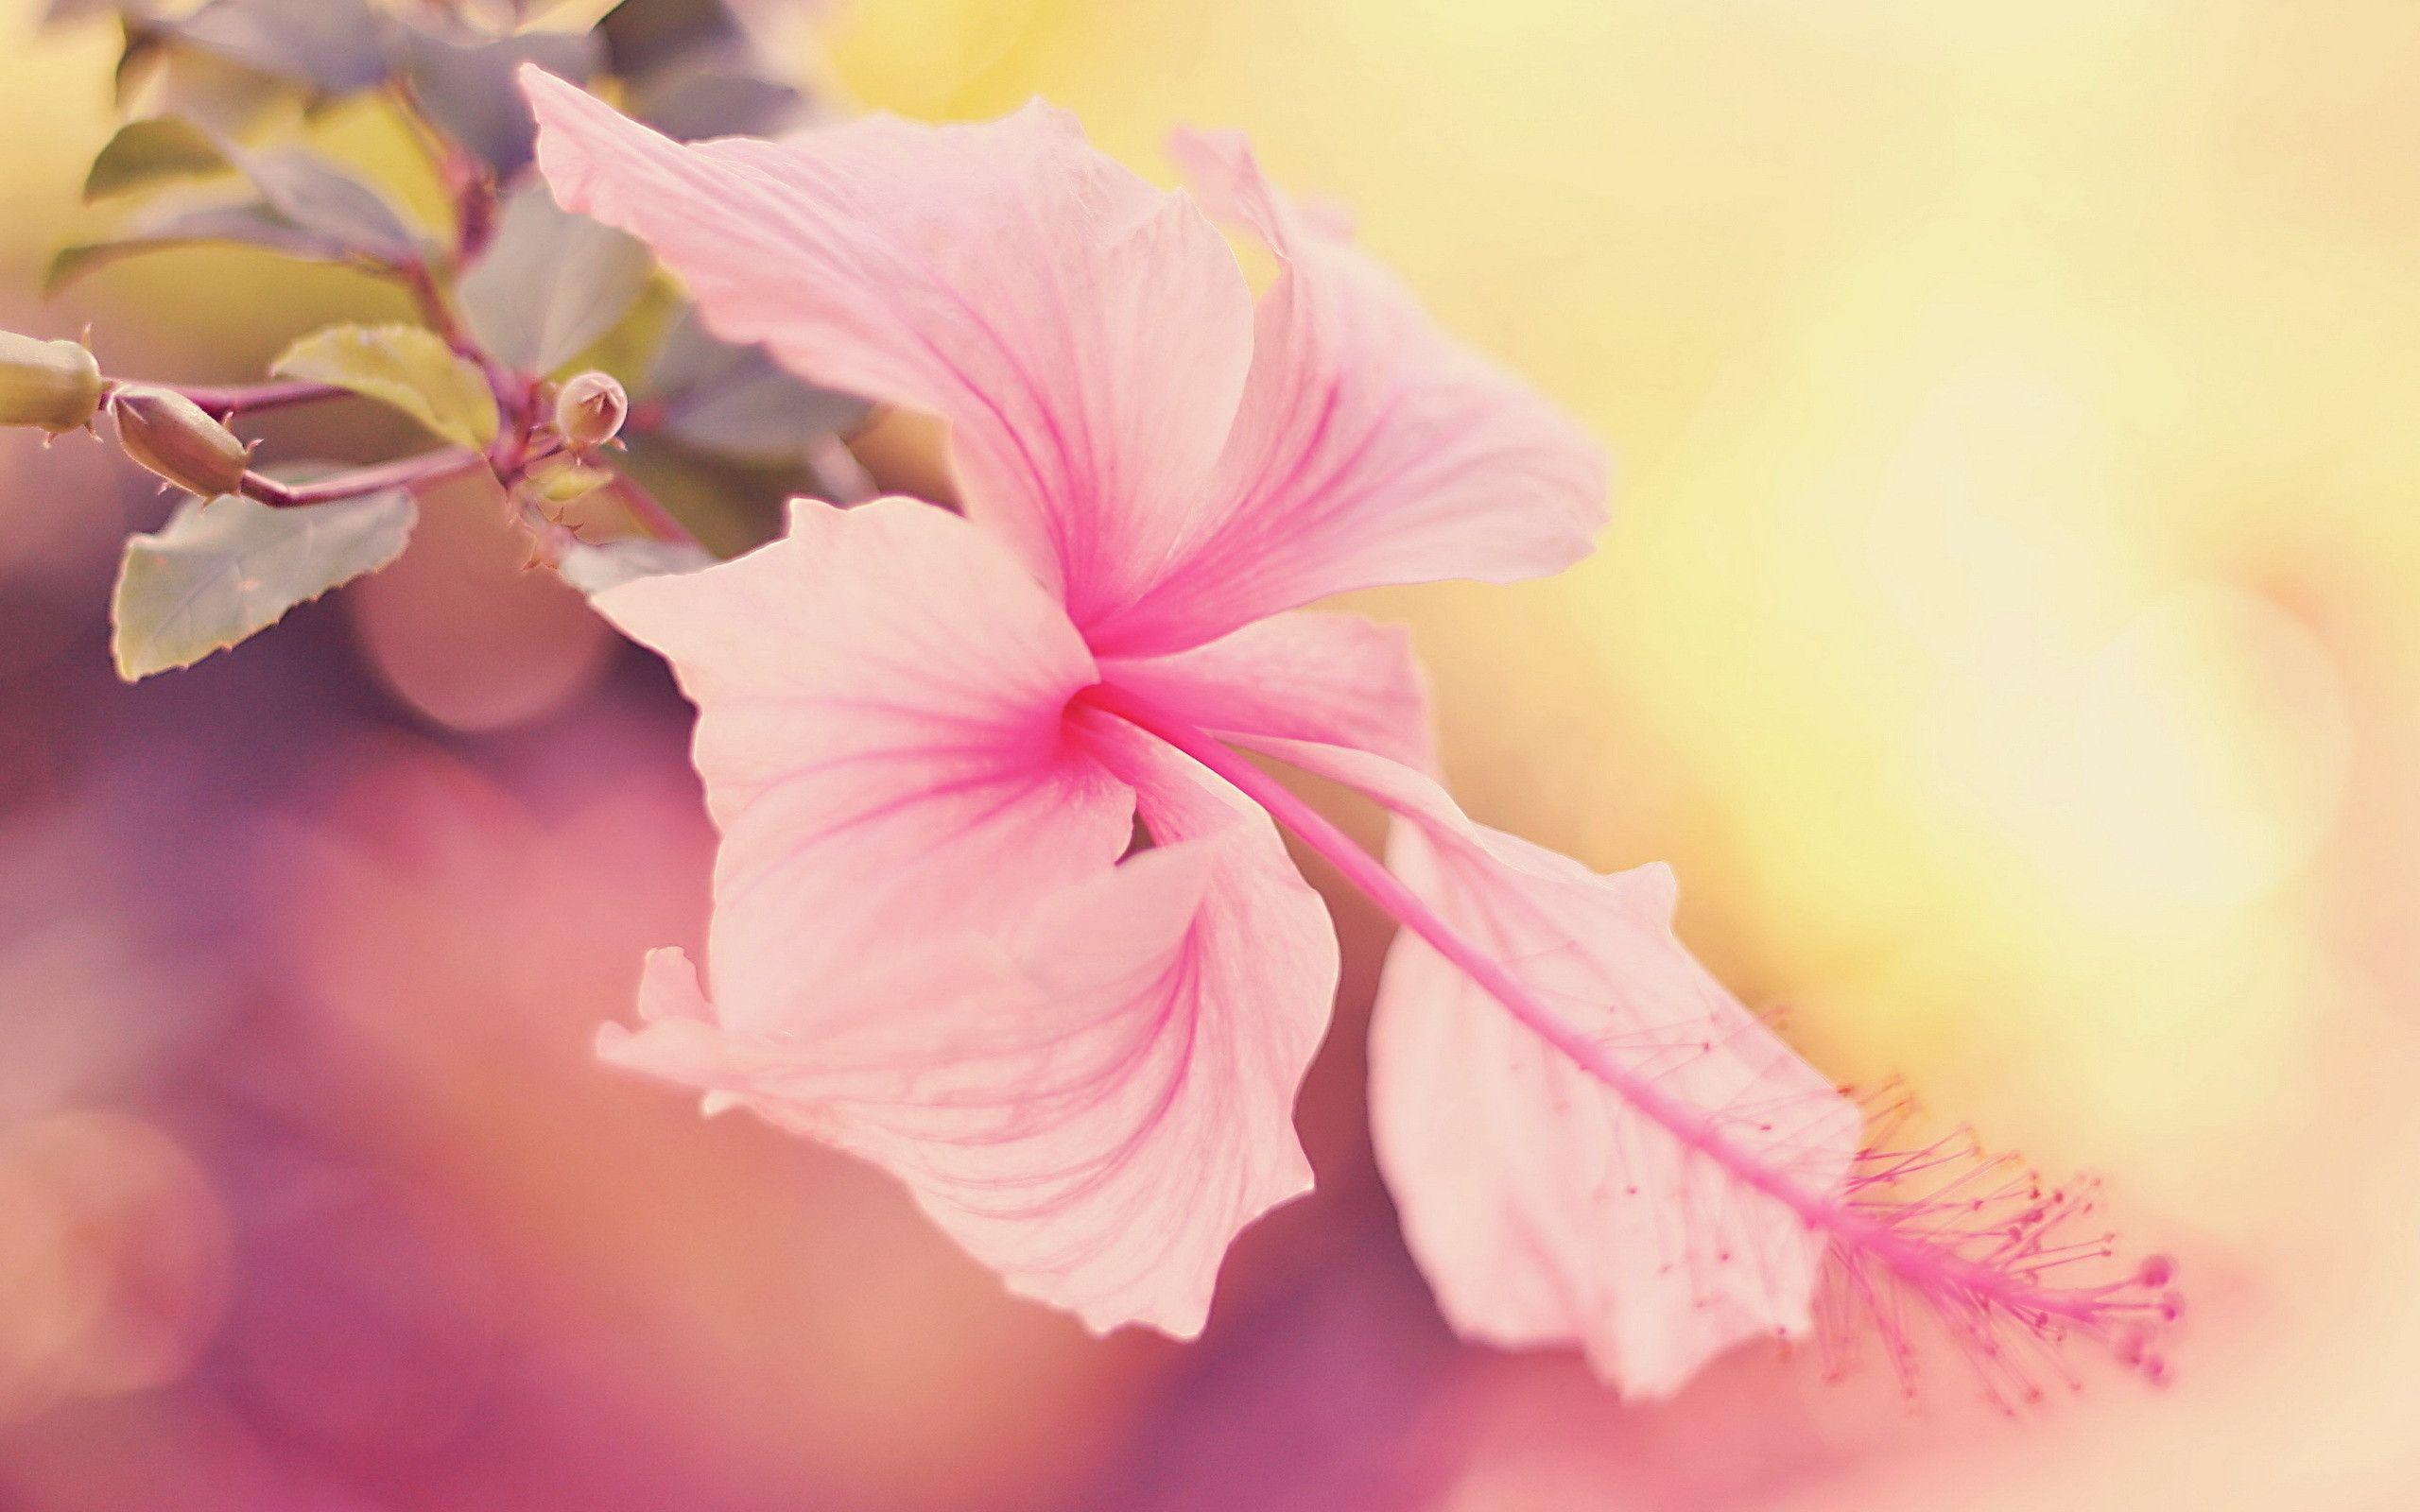 25 Selected hibiscus flower wallpaper aesthetic You Can Get It Free Of Charge - Aesthetic Arena